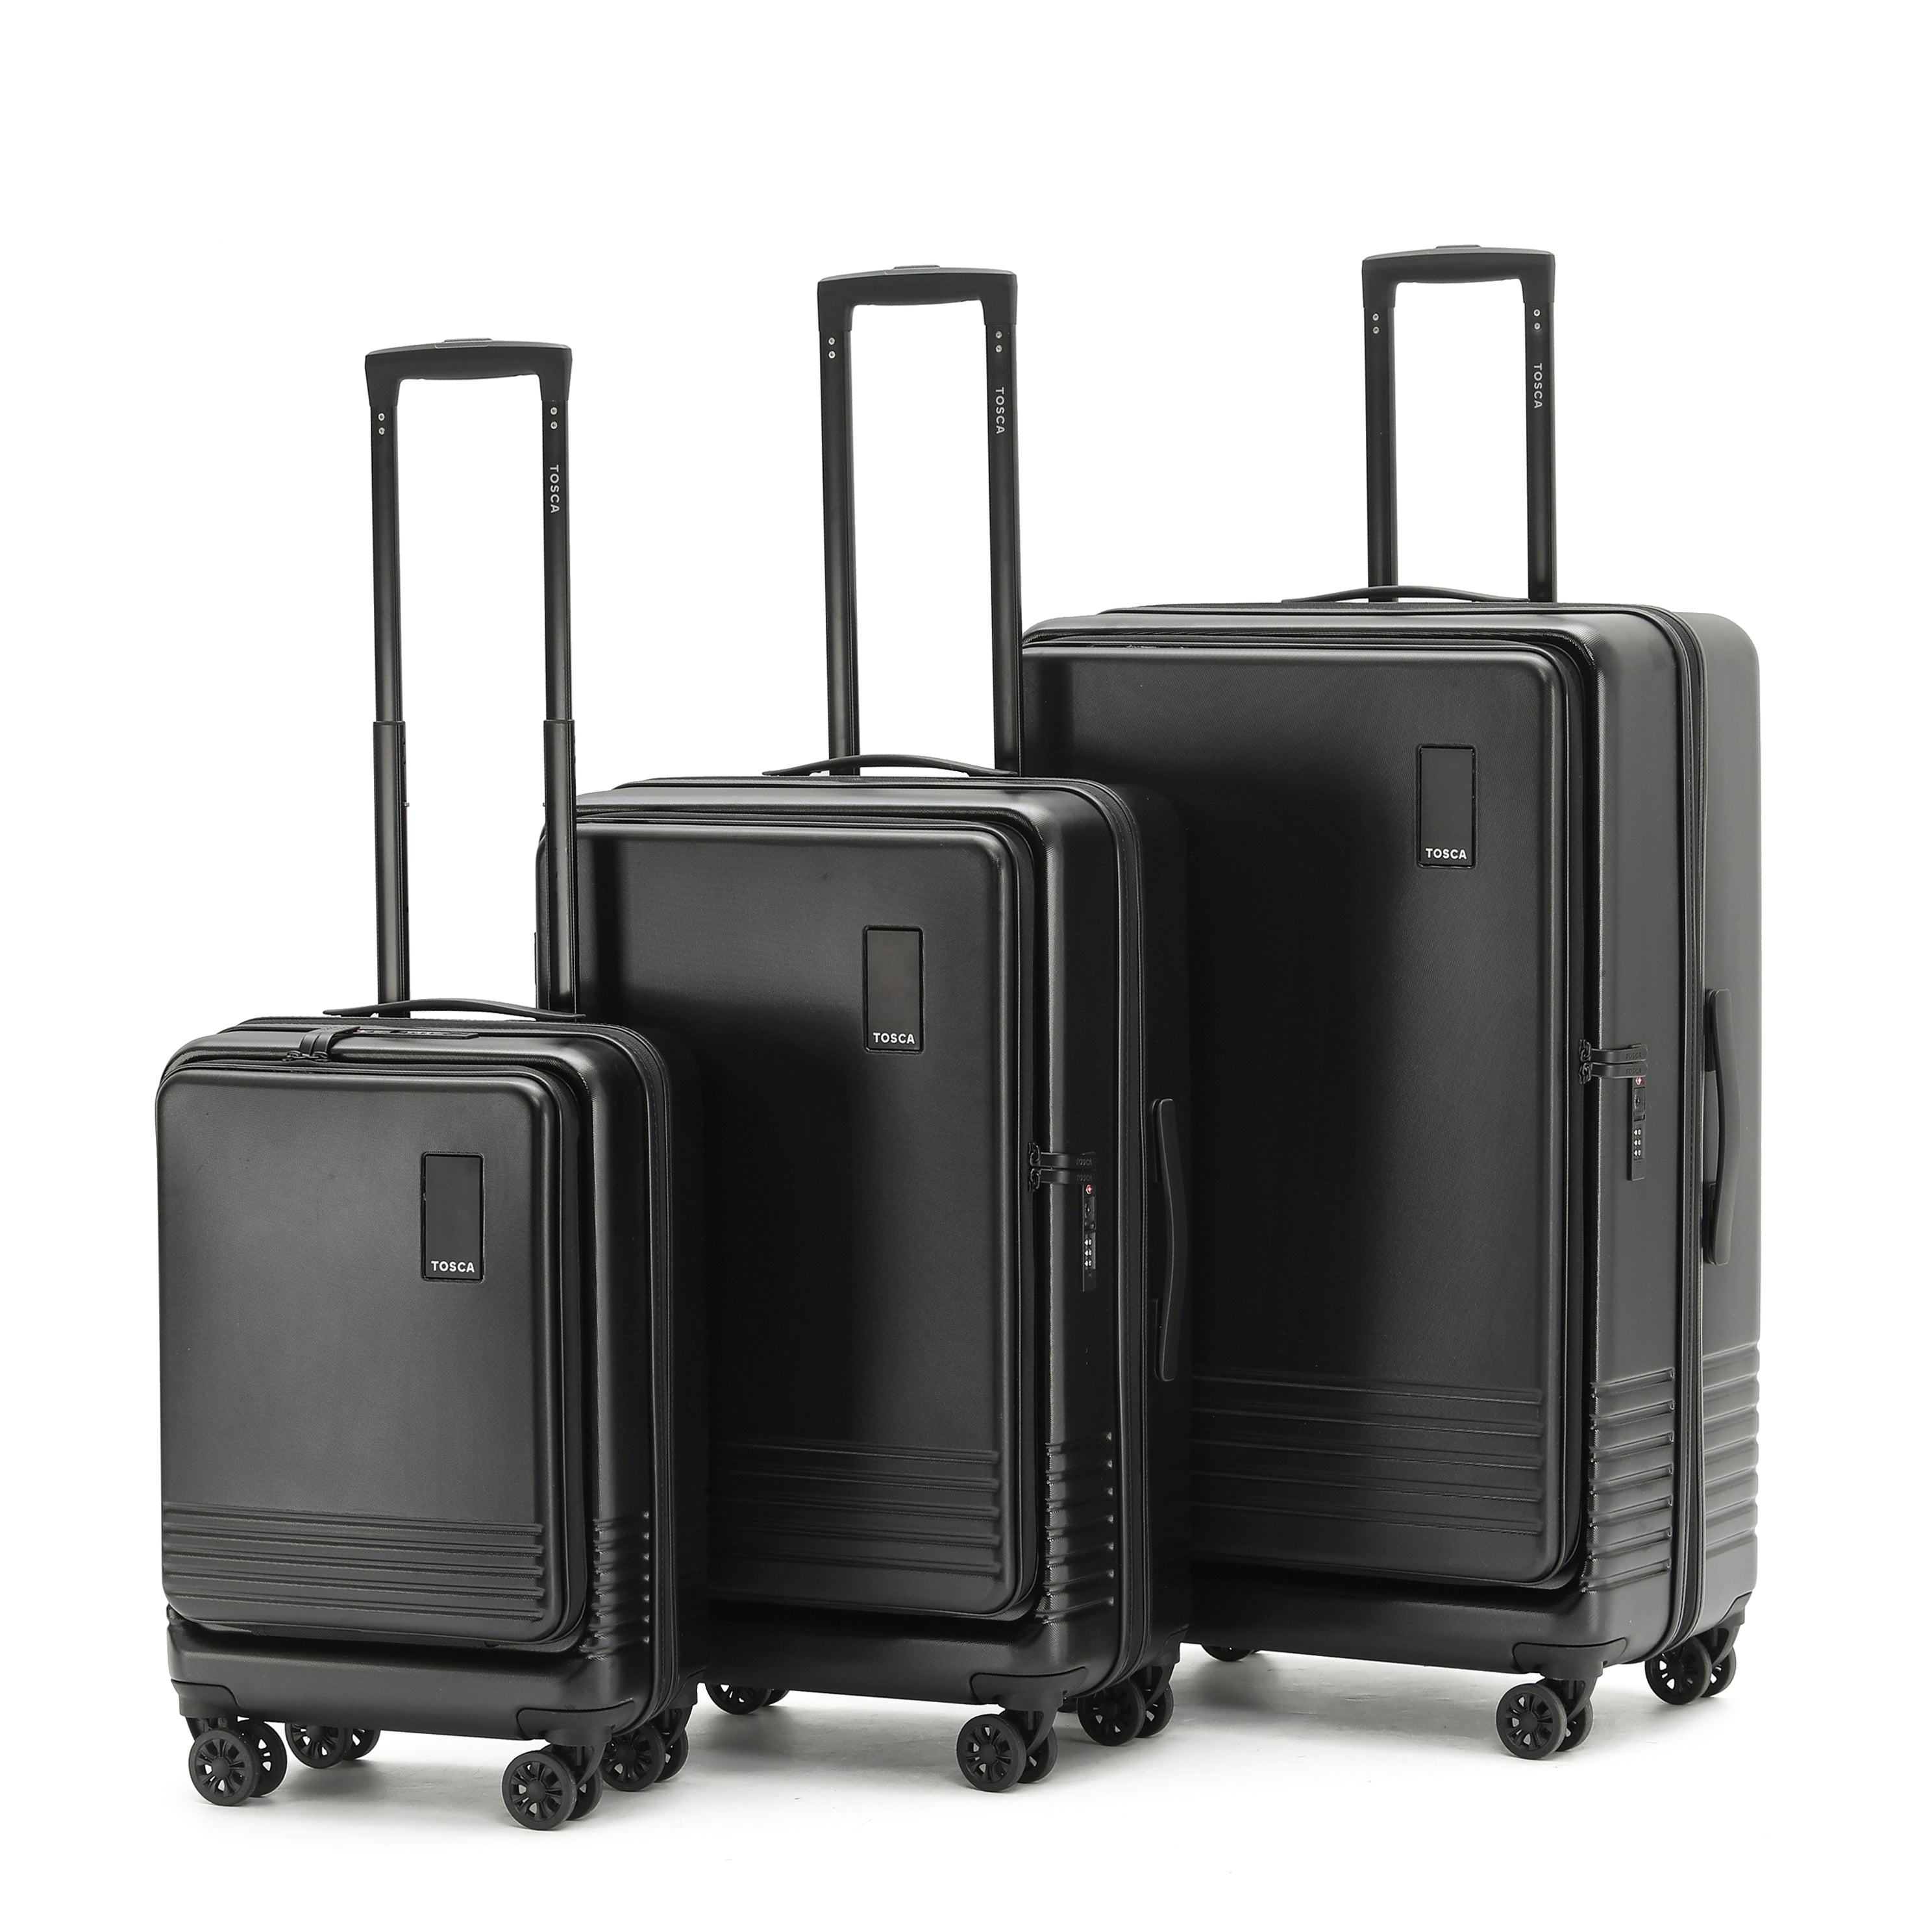 Tosca - TCA644 Horizon Front lid opening Set of 3 suitcases - Black-2